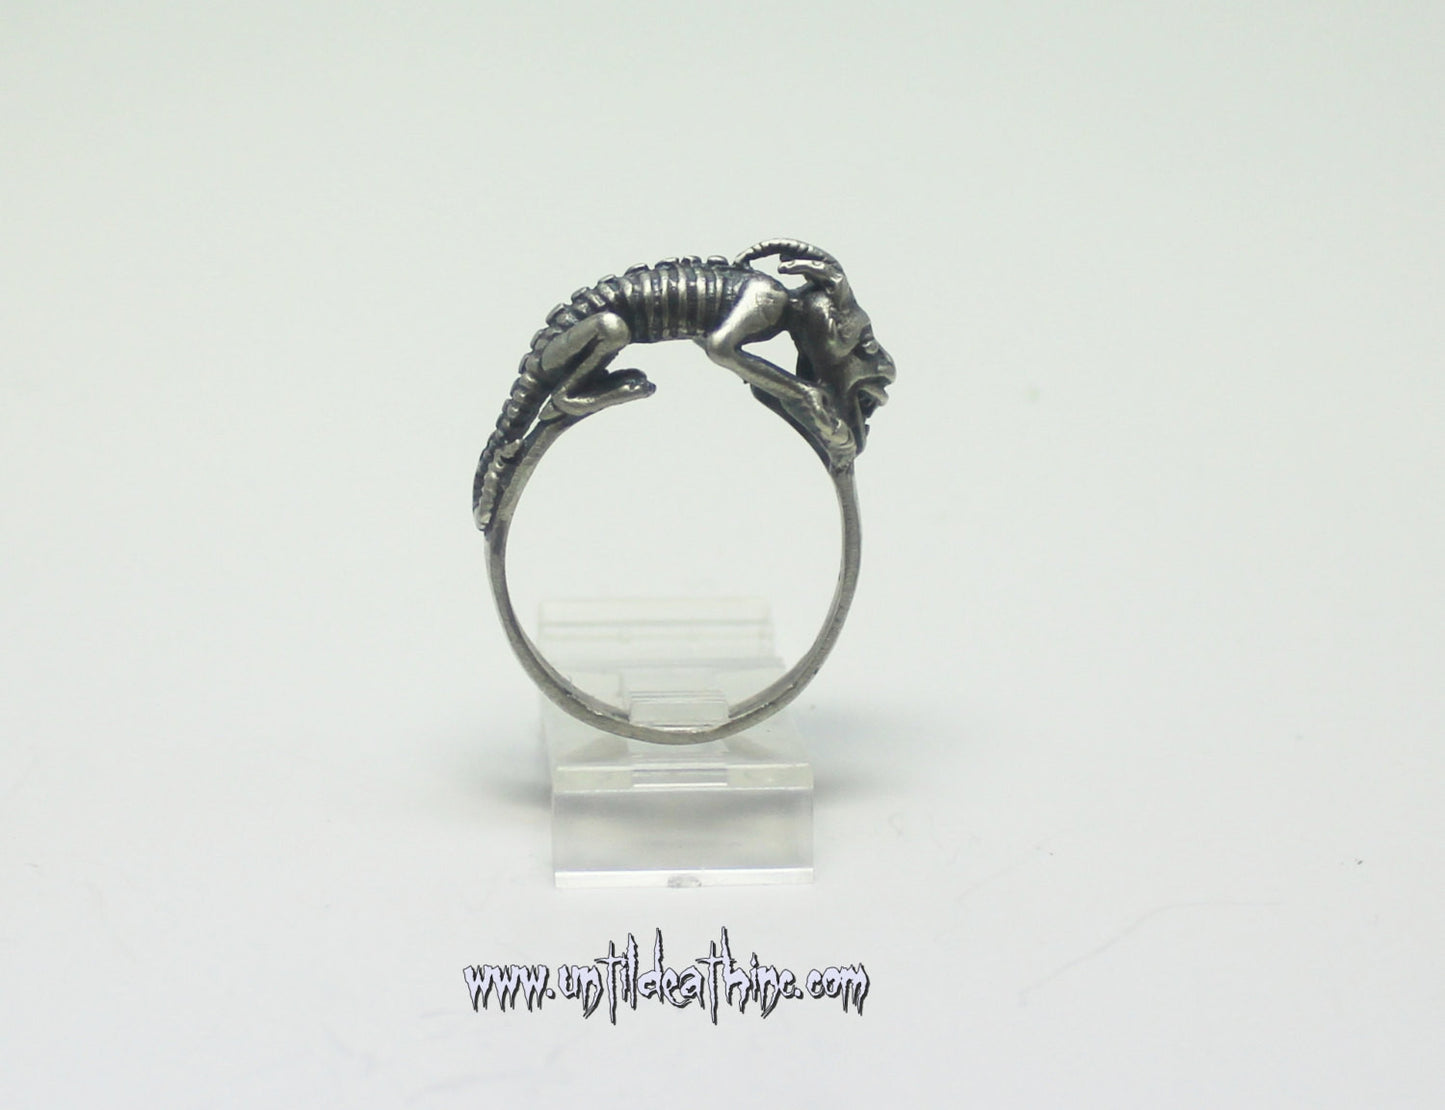 Until Death, Inc. "Devil Face Lizard Creature" 925 Solid Sterling Silver Ring. All Men's US Sizes.